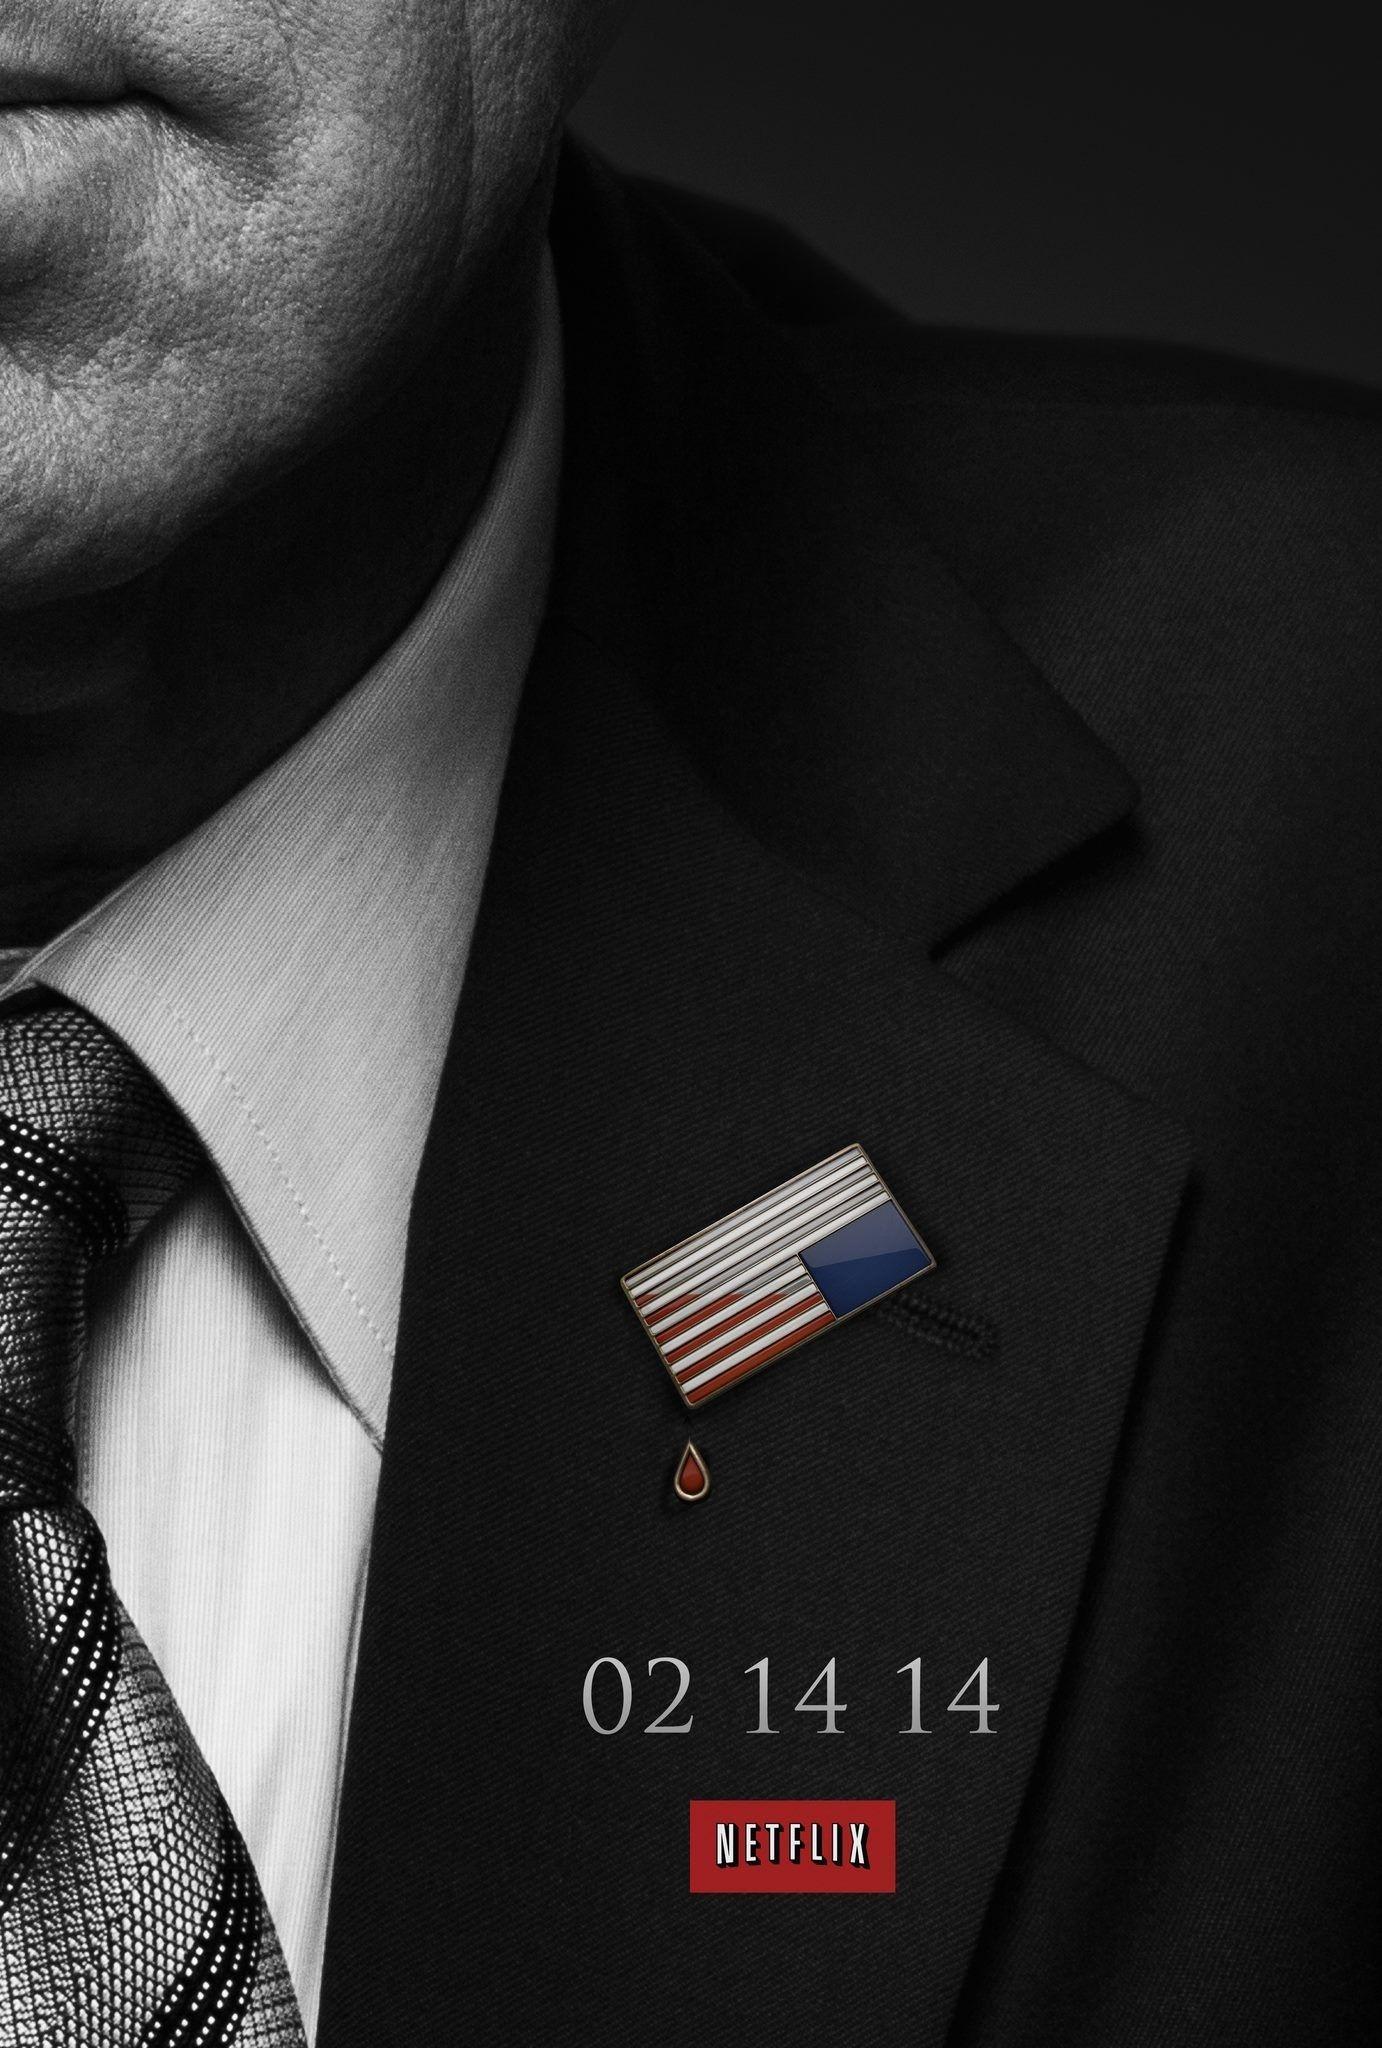 House Of Cards Wallpapers for Iphone , Iphone plus, Iphone plus